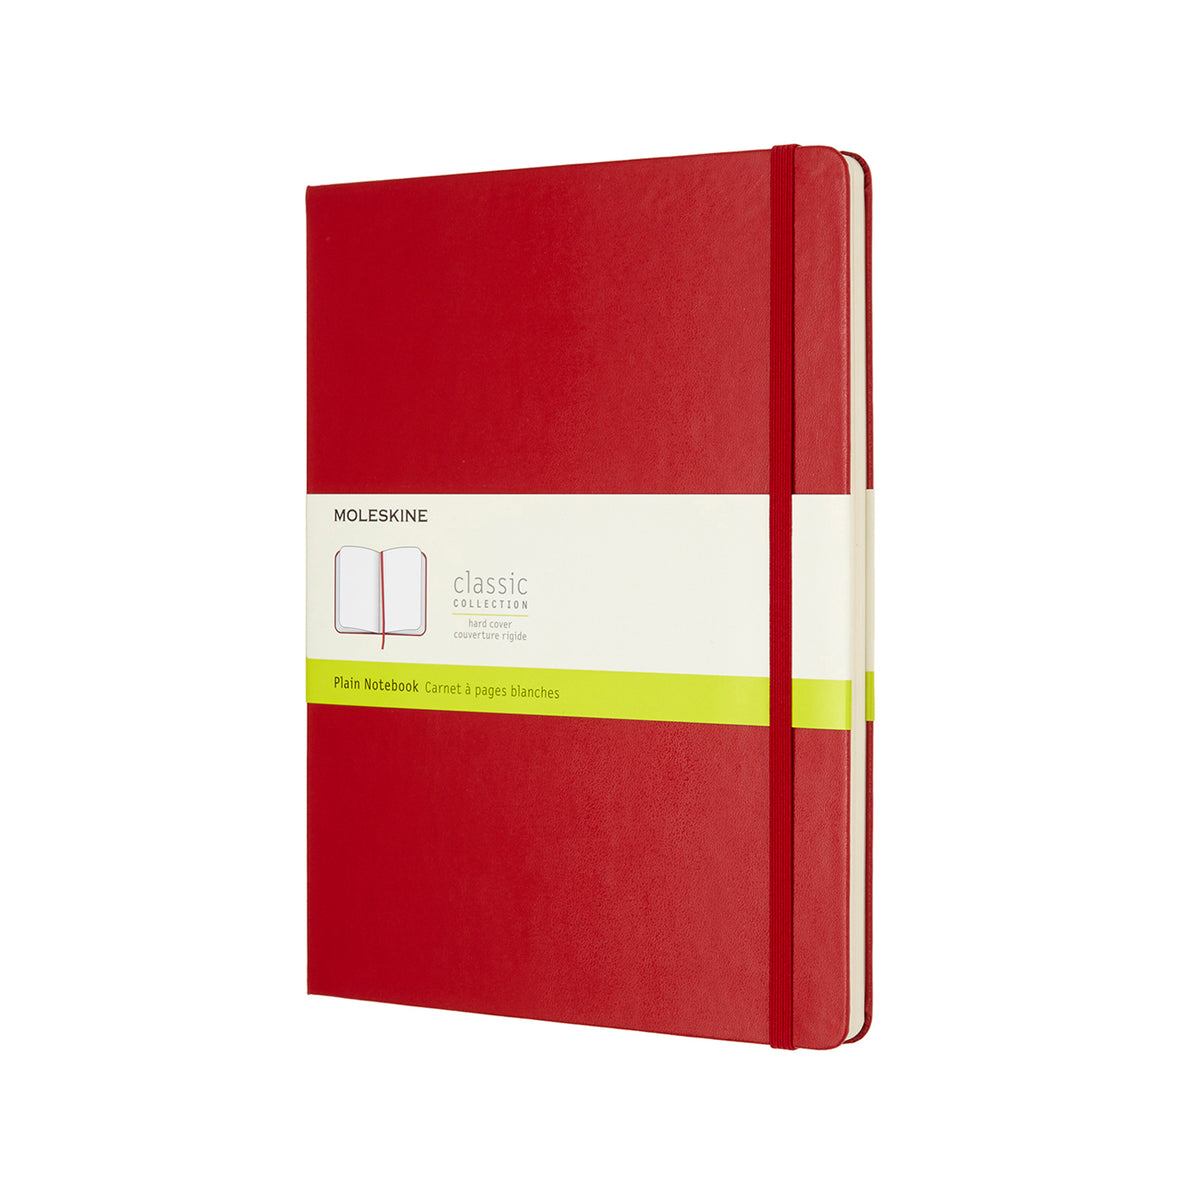 Moleskine - Classic Hard Cover Notebook - Plain - Extra Large - Scarlet Red